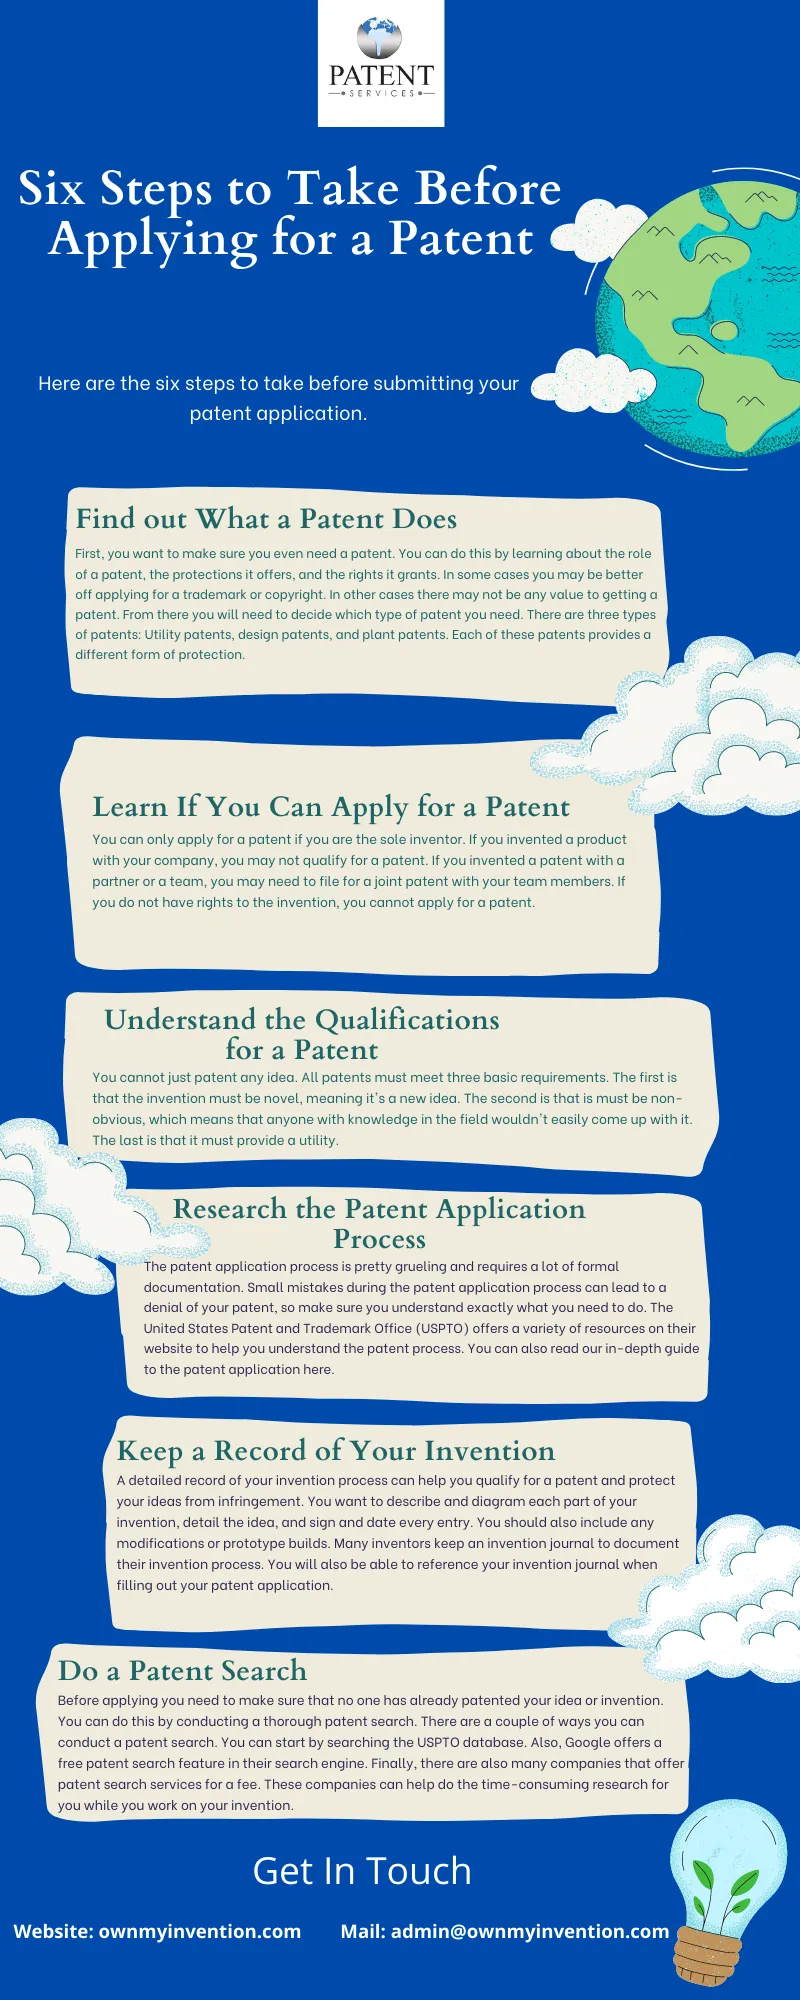 Six Steps to Take Before Applying for a Patent